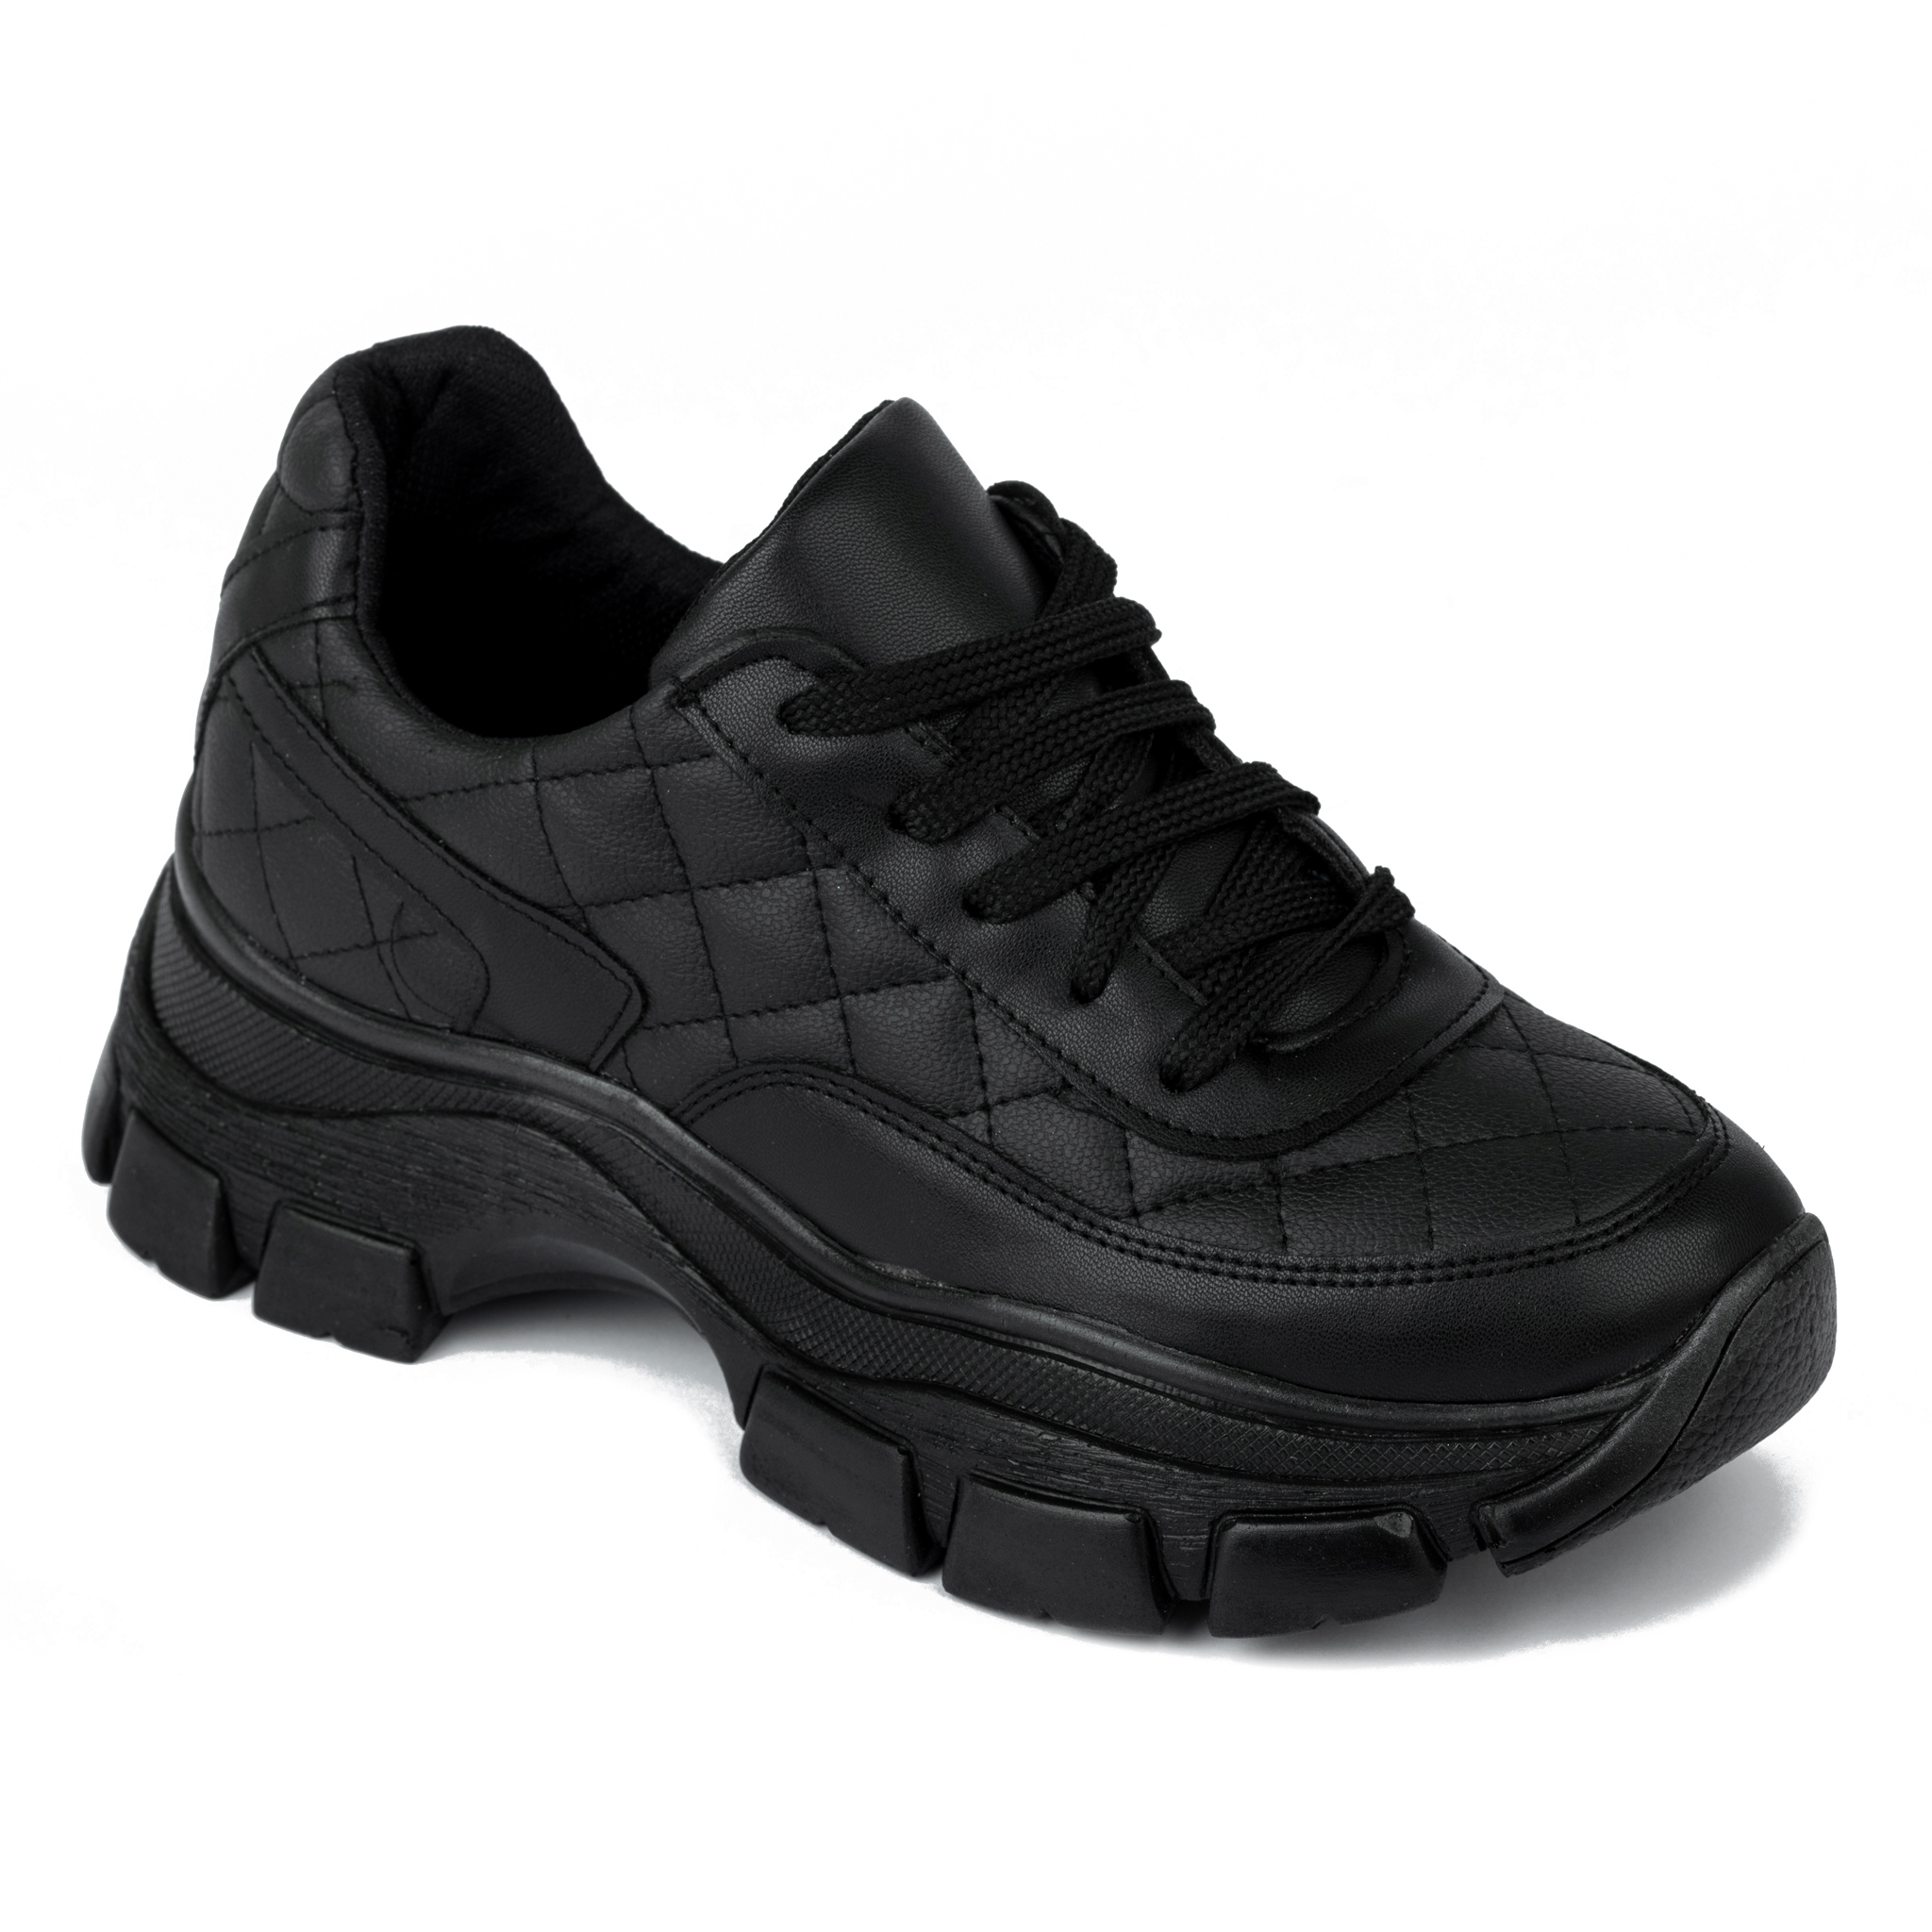 SAW LACE UP SNEAKERS - BLACK